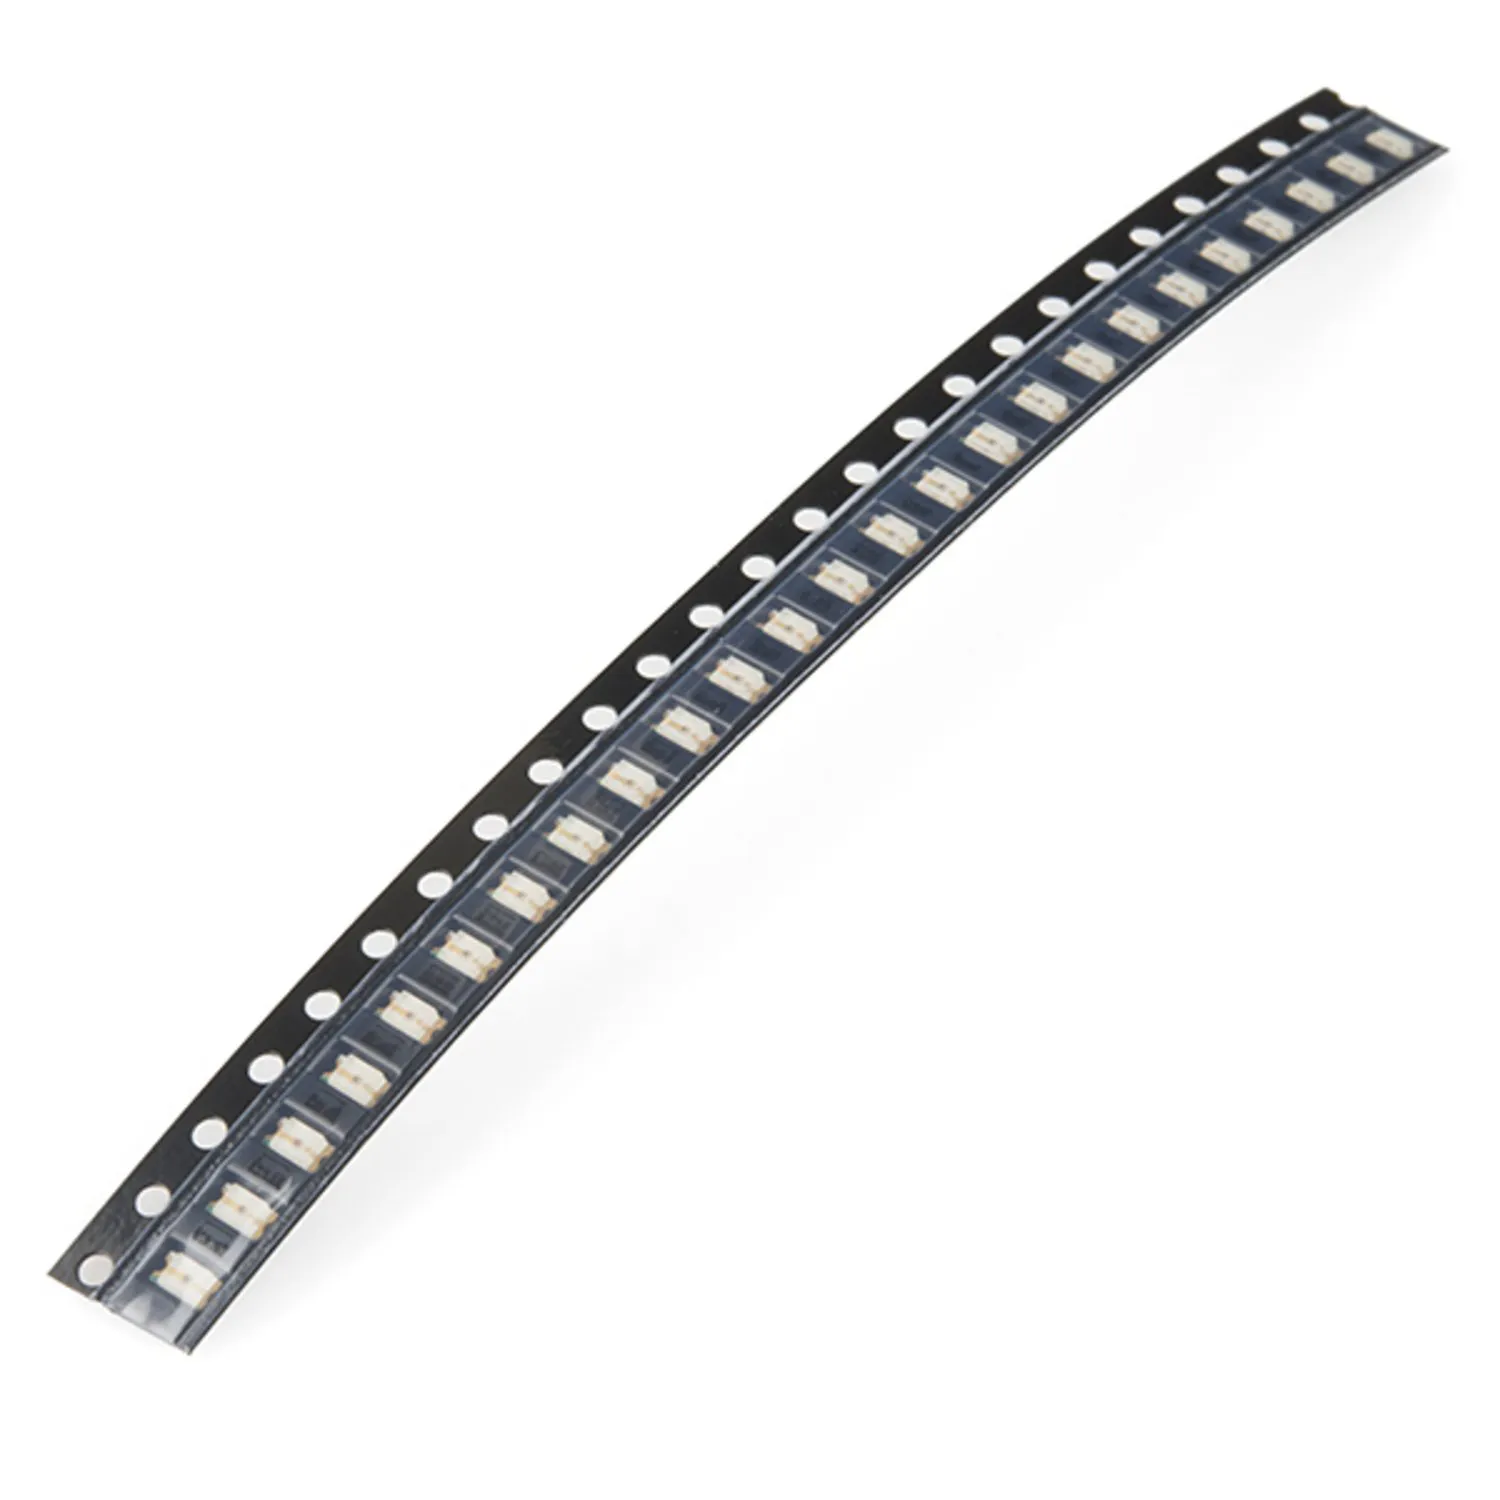 Photo of SMD LED - Green 1206 (strip of 25)